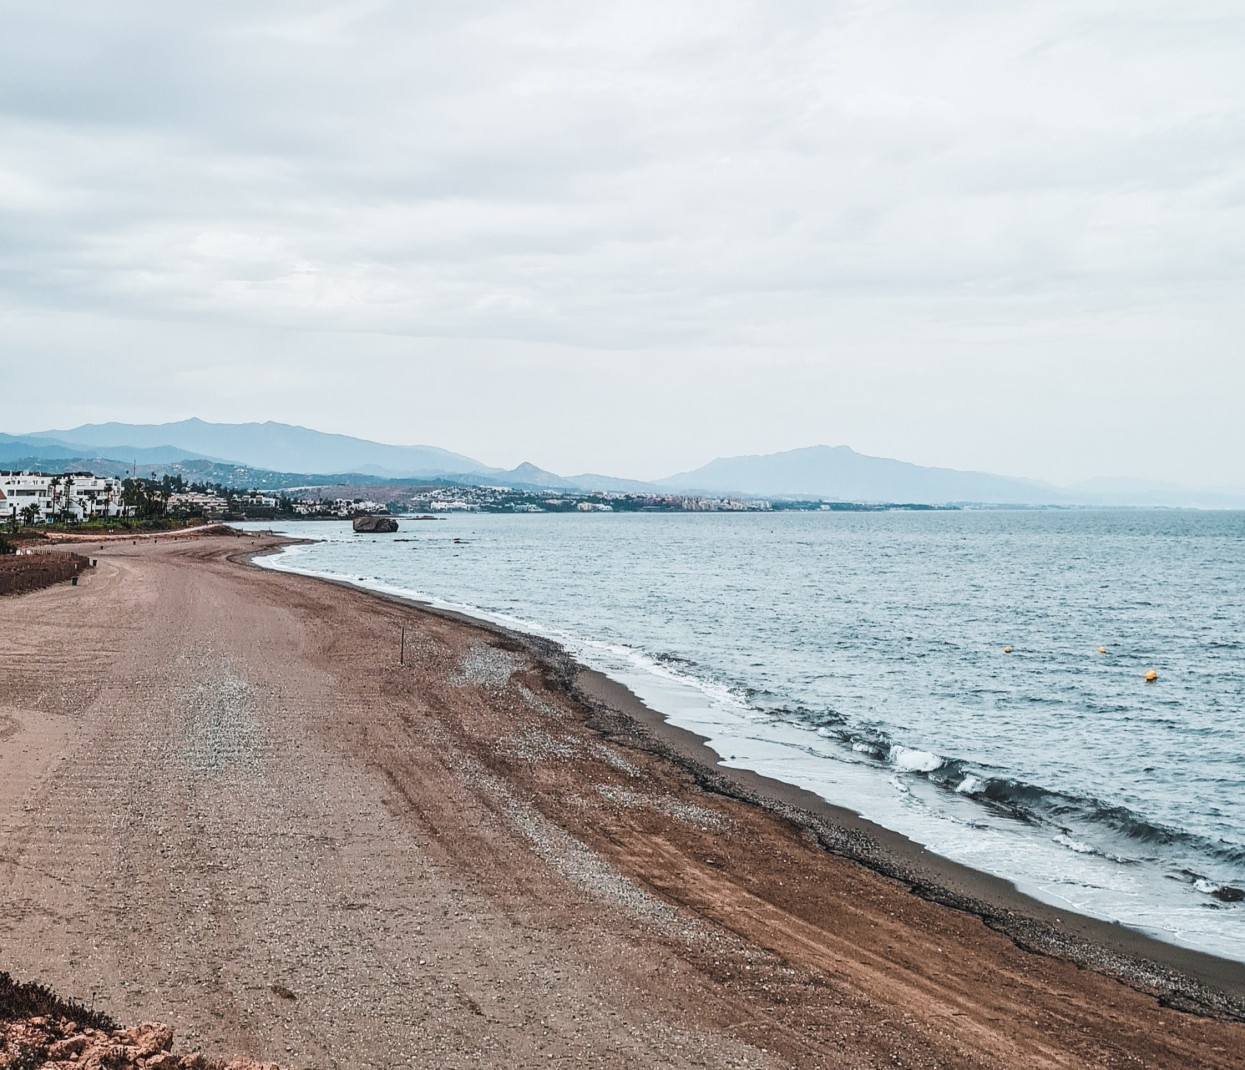 7-Day Road-Trip Across Barcelona & Southern Spain - Day 4: Spend the in Estepona